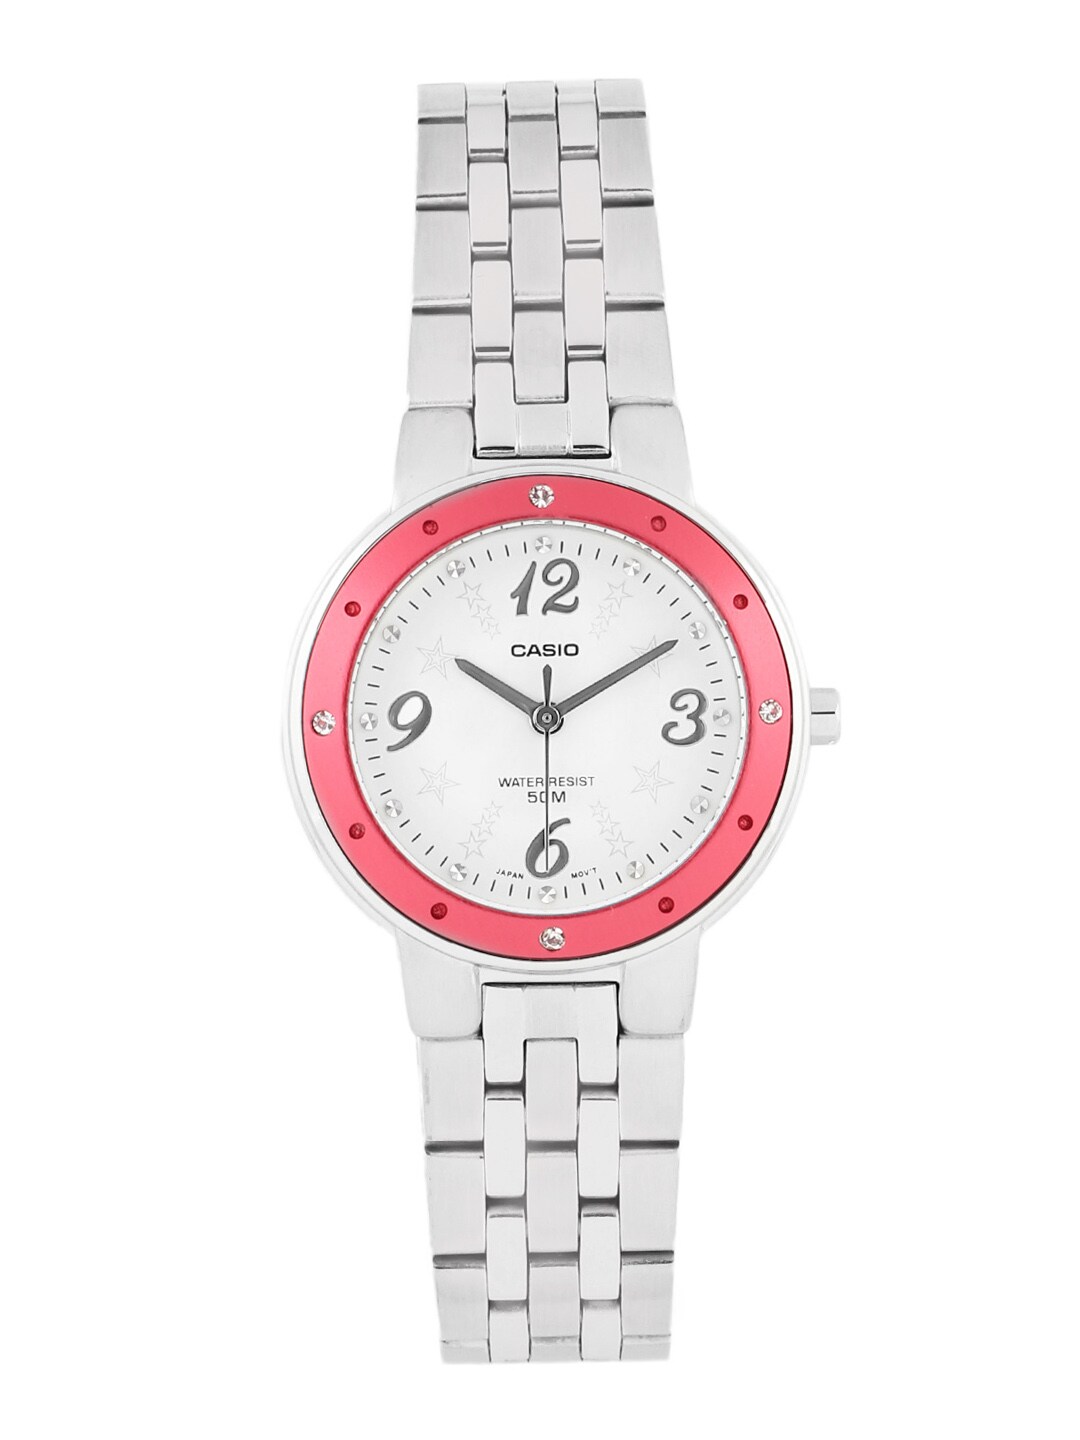 CASIO Enticer Women White Dial Analogue Watch